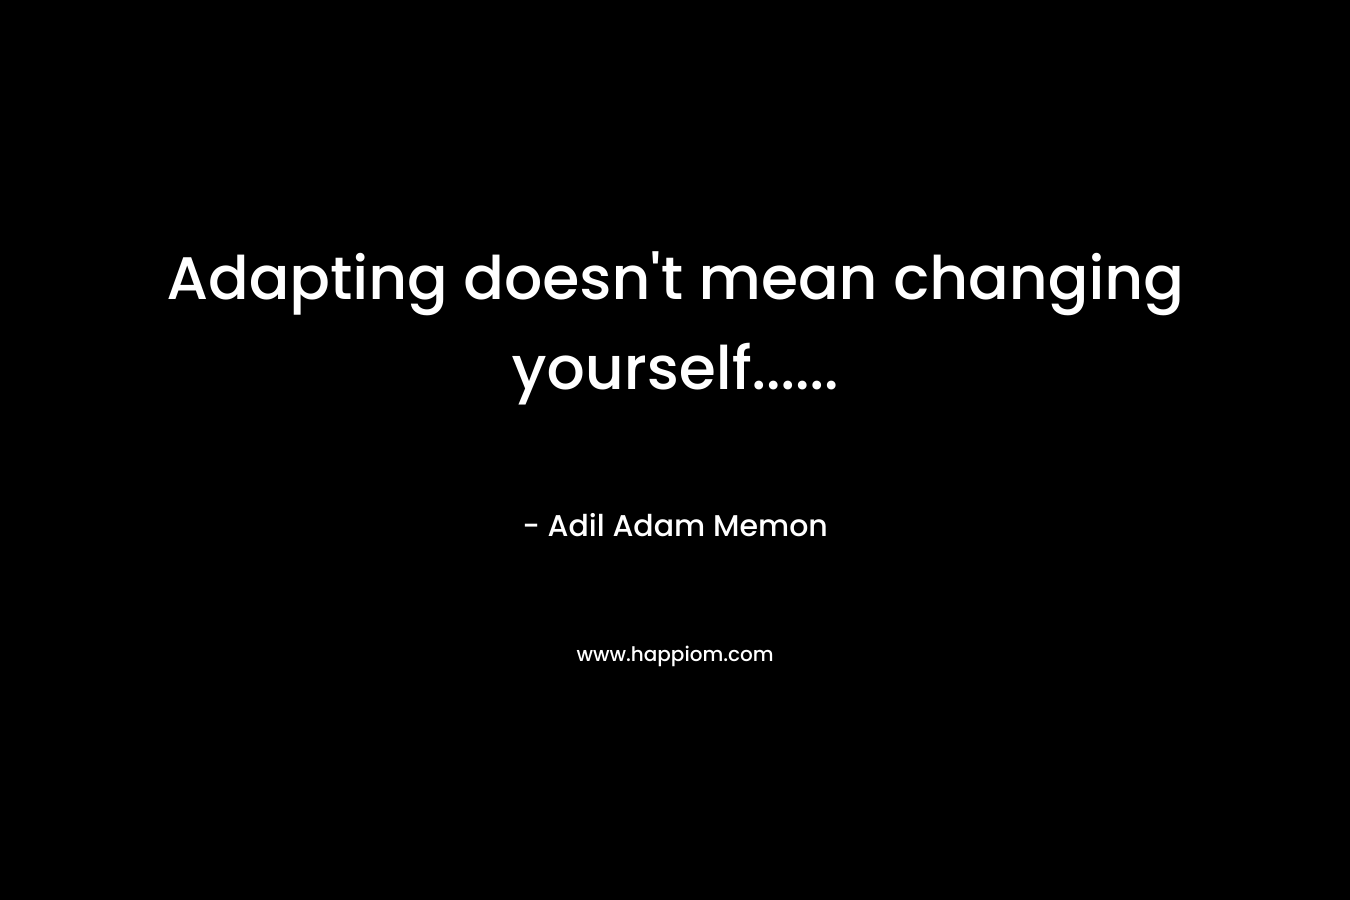 Adapting doesn't mean changing yourself......